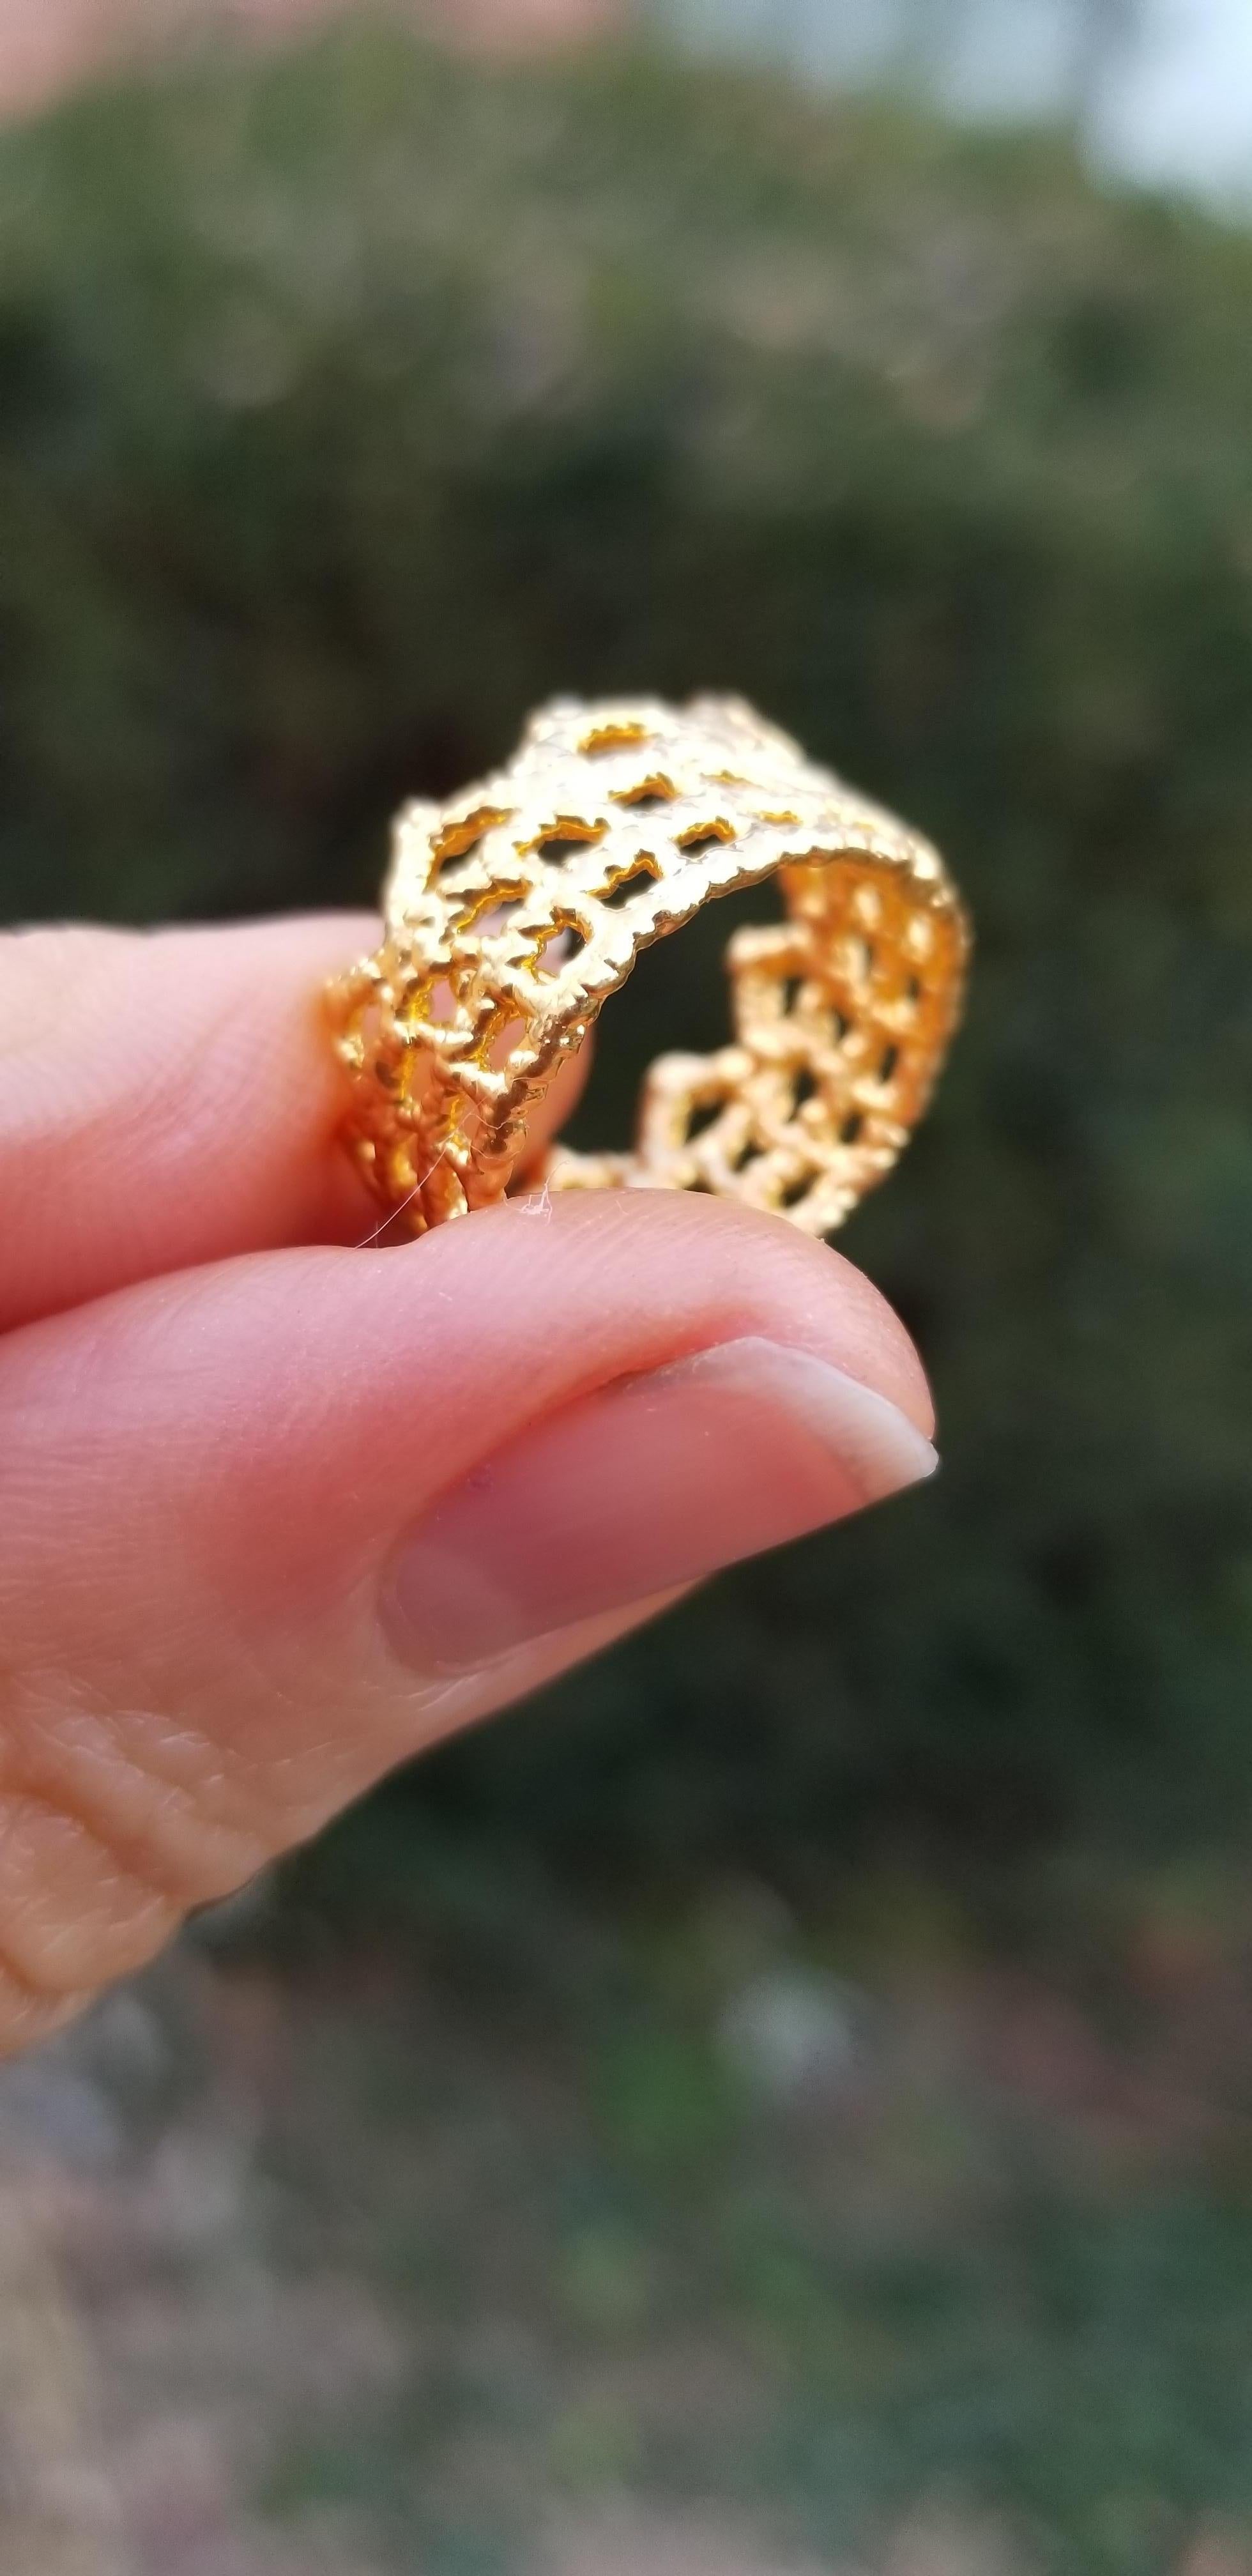 This piece is a delicate treasure - like a golden crown for the finger.
The artist, Monika Kunuttson, has. Become renown for her jewelry which is cleverly constructed of lace, which is then magically dipped in a bath of pure 18k gold, creating a